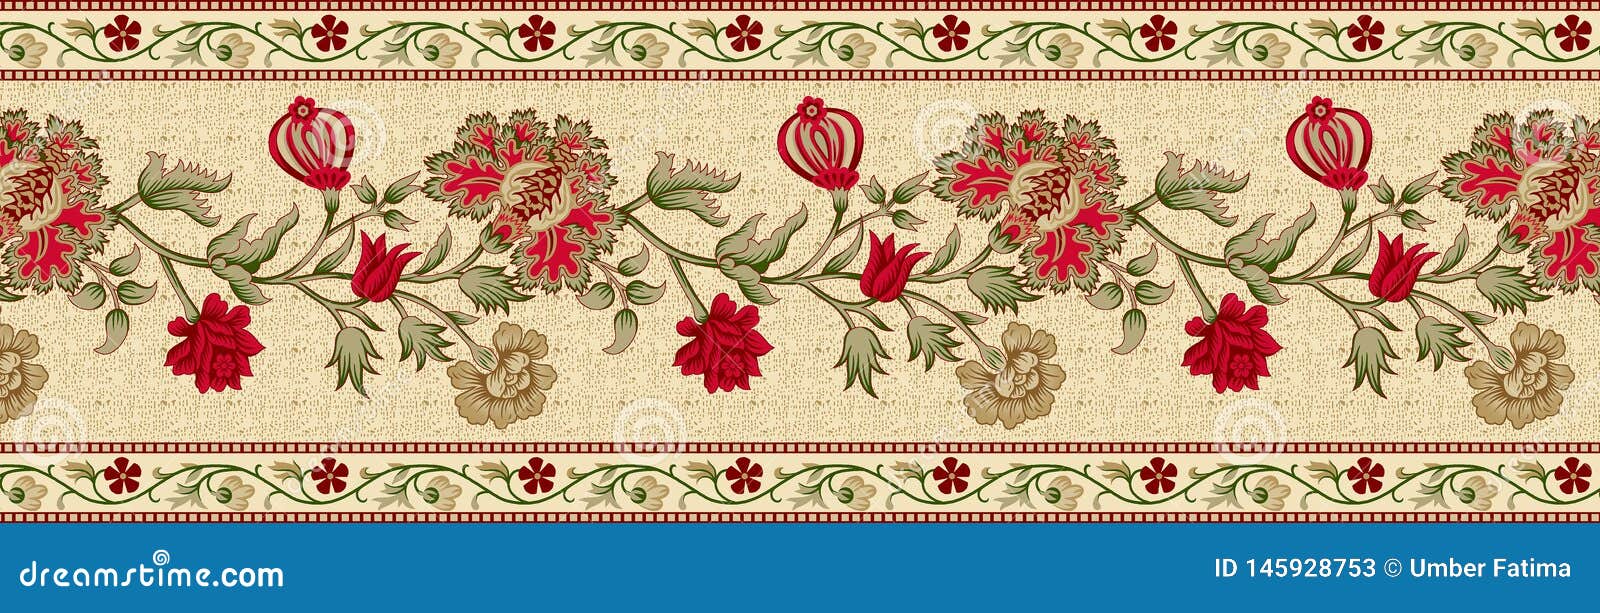 beautiful red flowers border for textile fashion